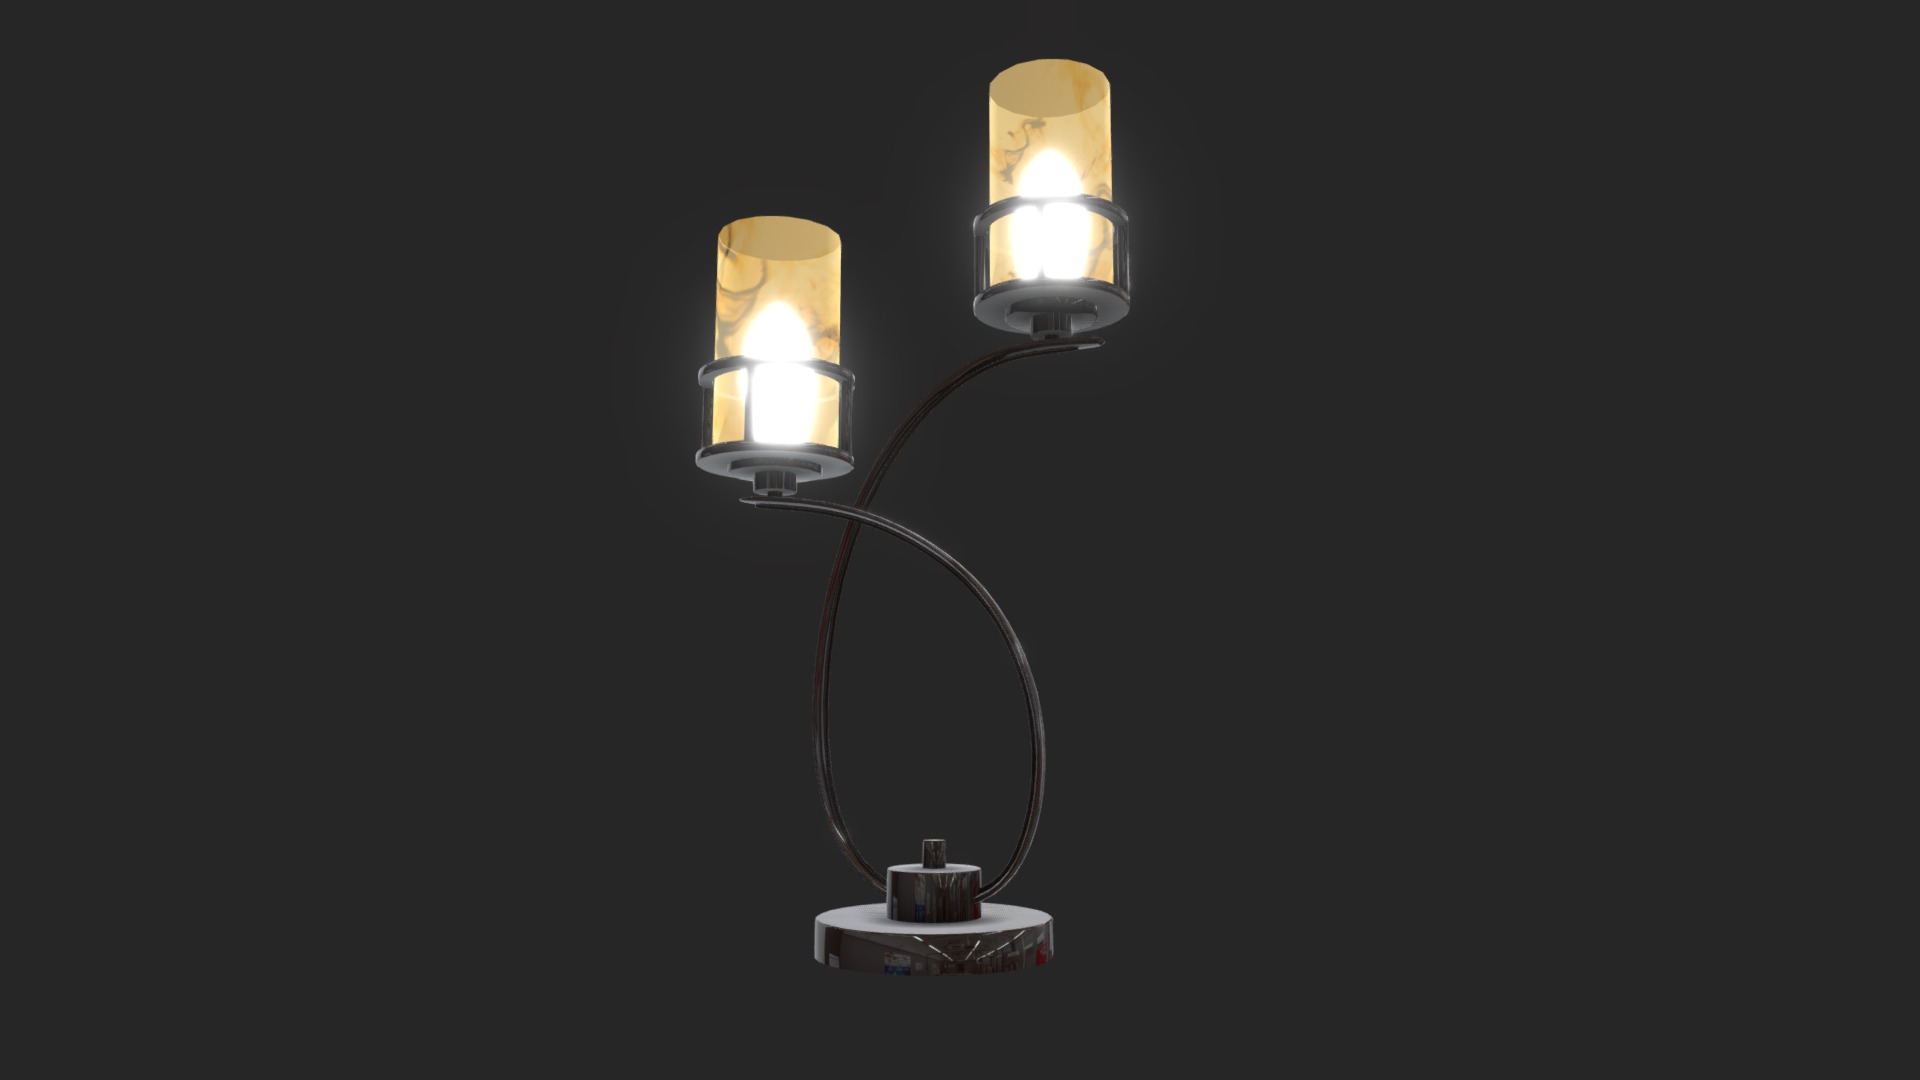 3D model HGPL-54 - This is a 3D model of the HGPL-54. The 3D model is about a group of light bulbs.